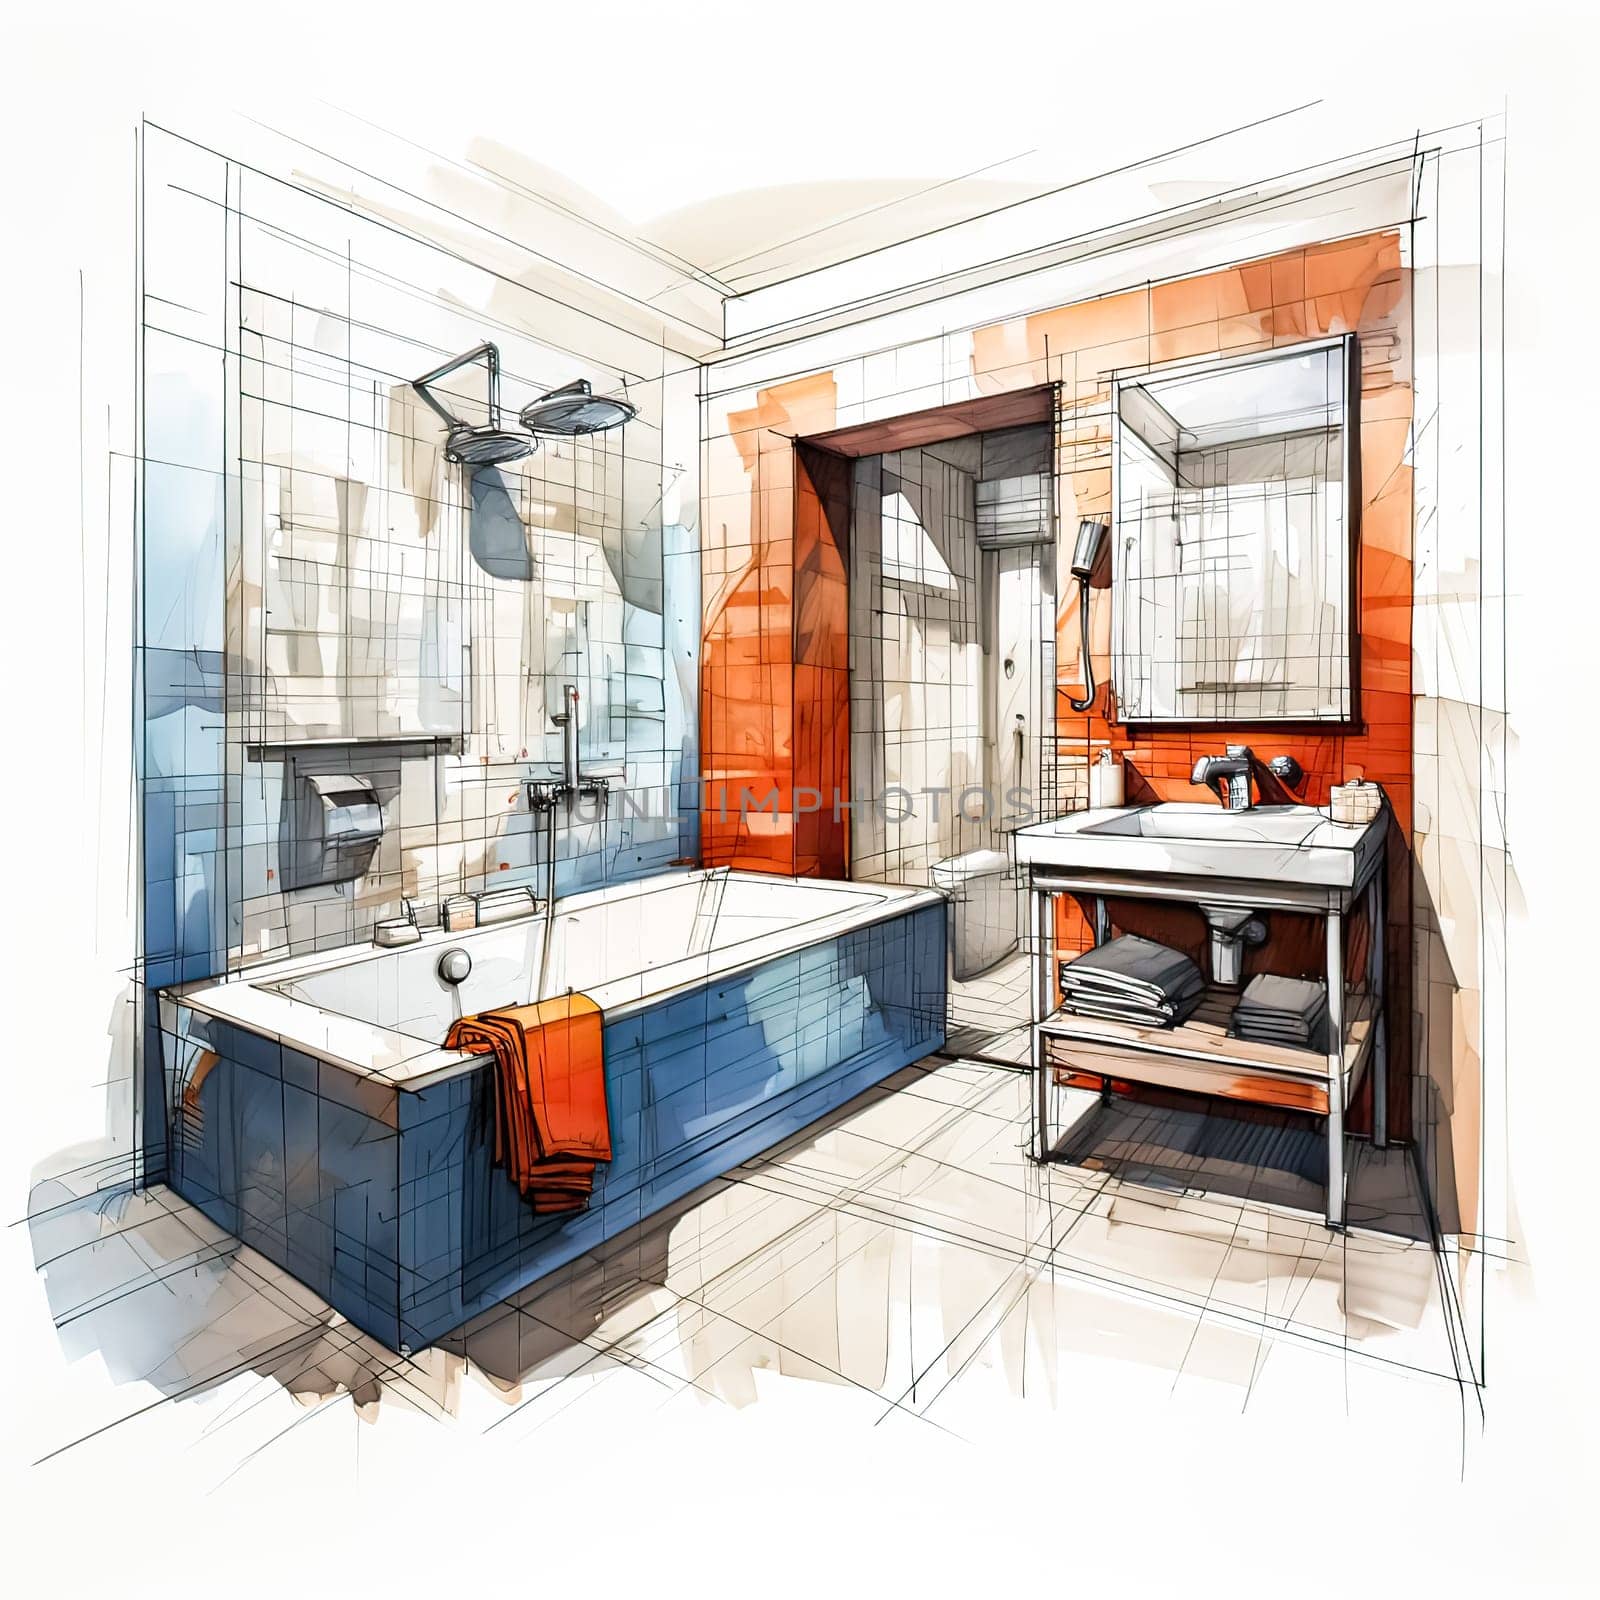 Watercolor Bath Beauty, A sketch reveals the allure of a modern bathroom, fusing design with artistic expression